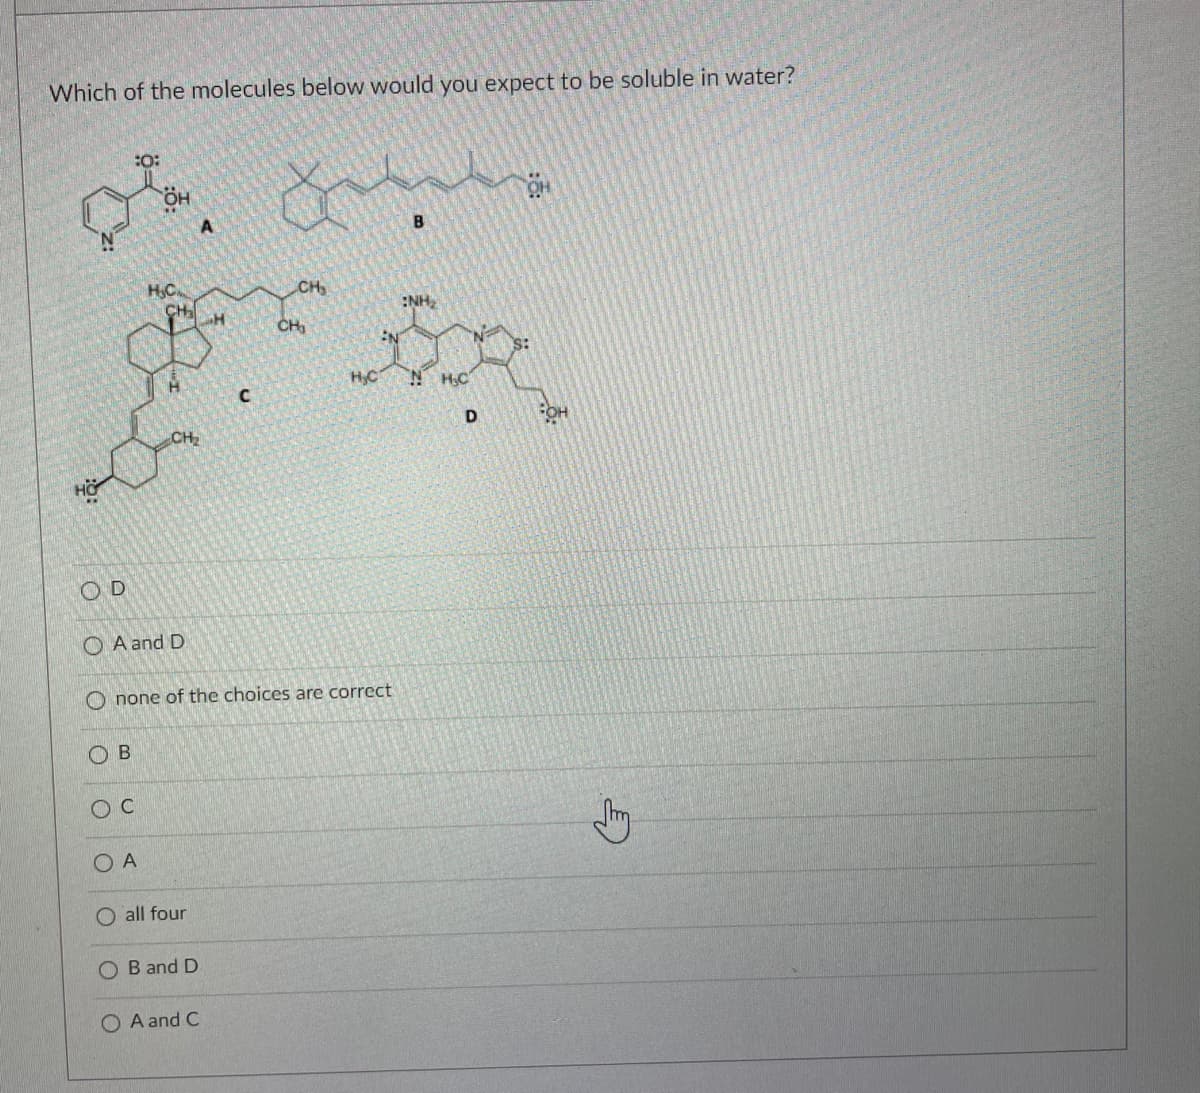 Which of the molecules below would you expect to be soluble in water?
:O:
B
H,C.
CH
:NH,
CH,
HC
N H;C
CH
HO.
O D
O A and D
none of the choices are correct
O B
O A
O all four
O B and D
O A and C
